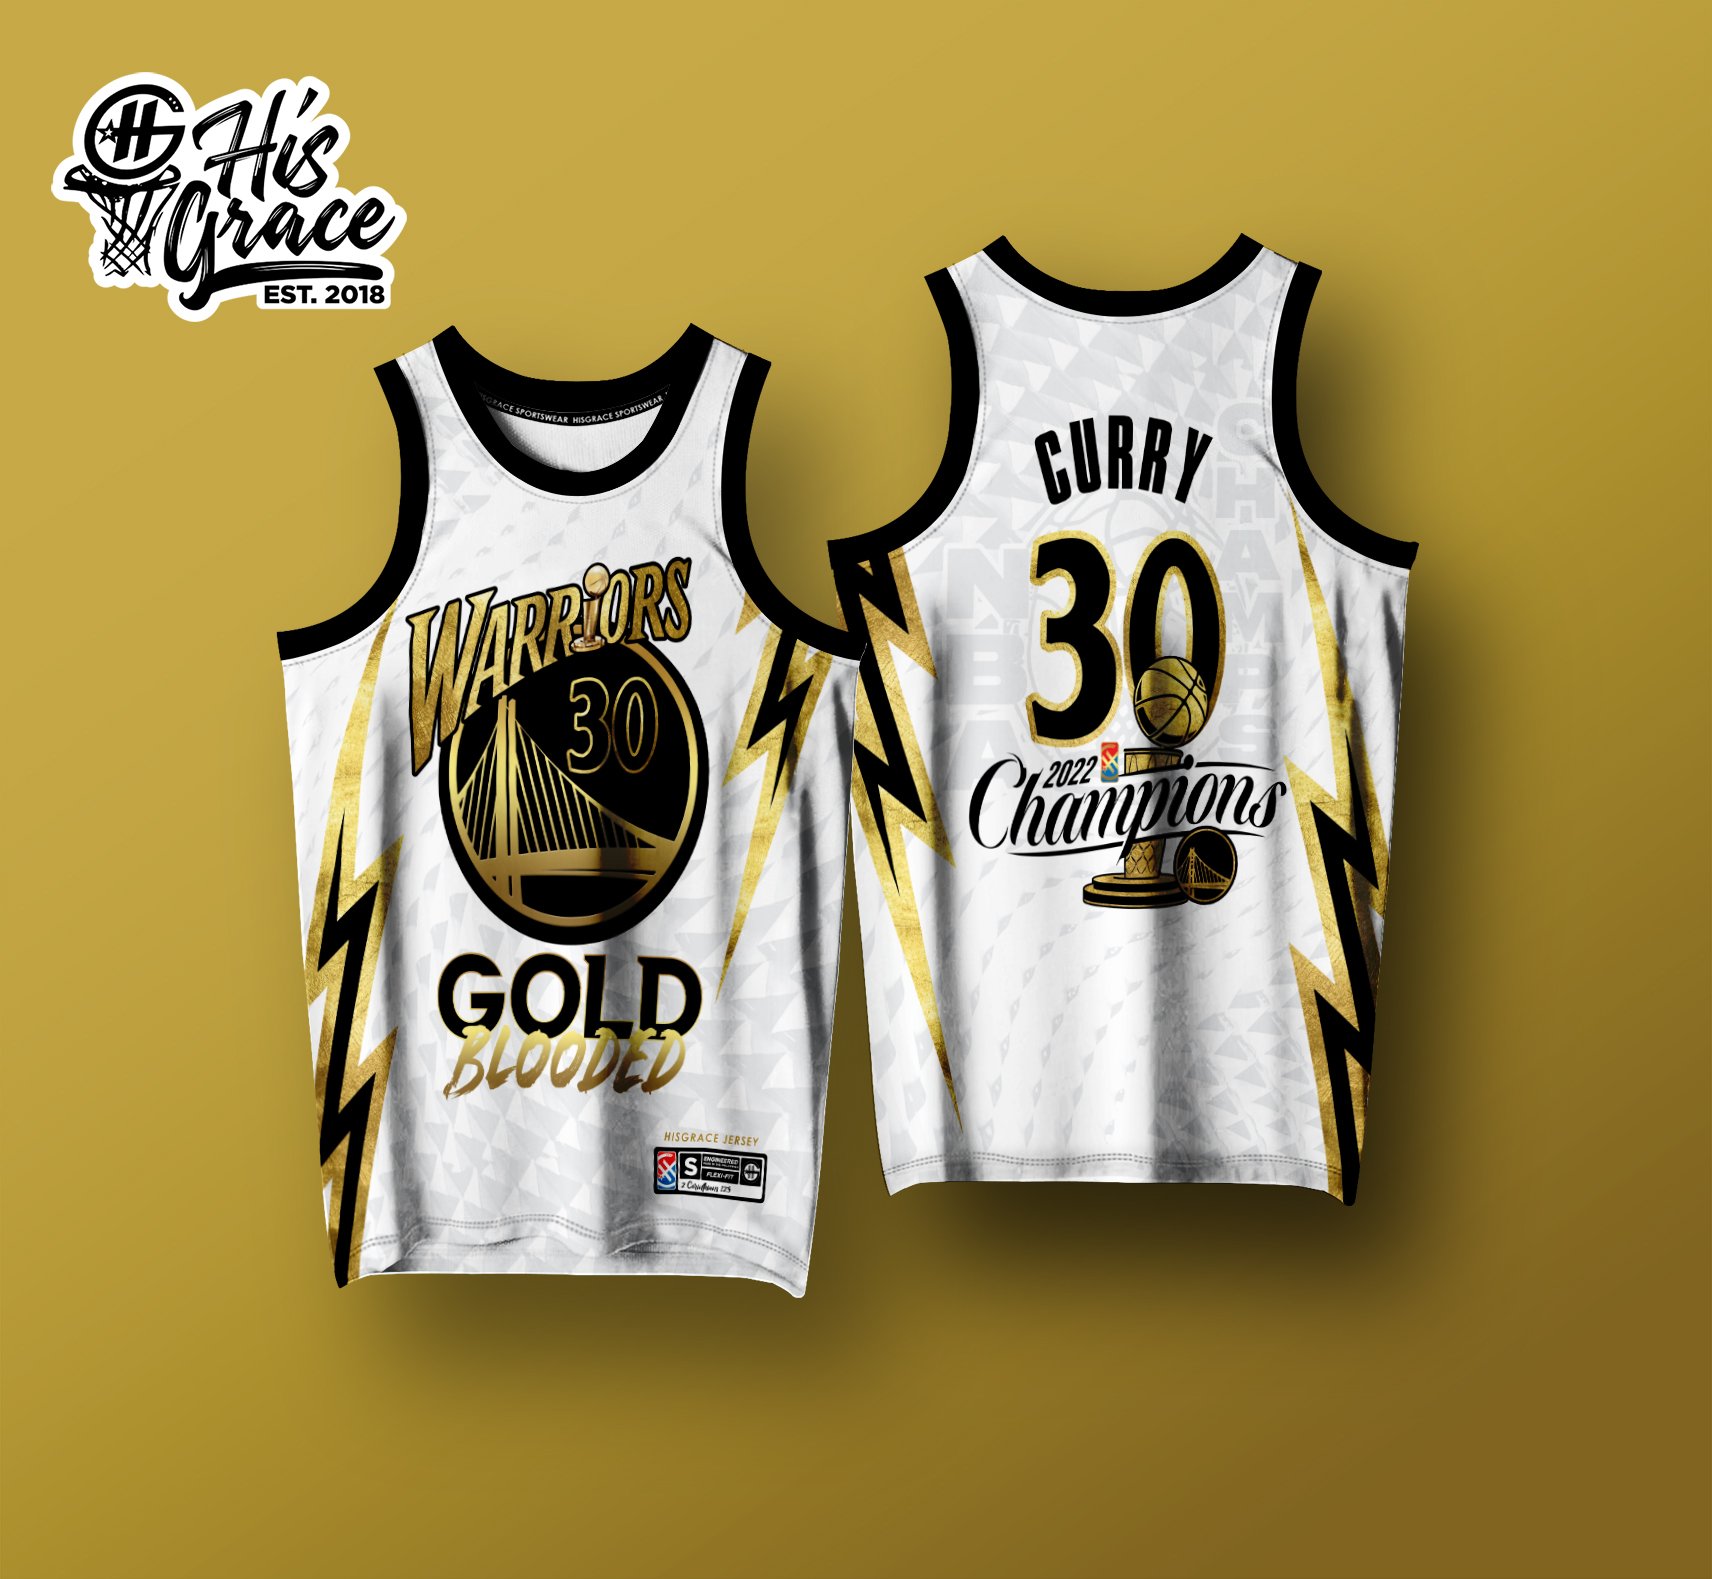 Magnolia Hotshots jersey concept by @geralddesign . Your thoughts